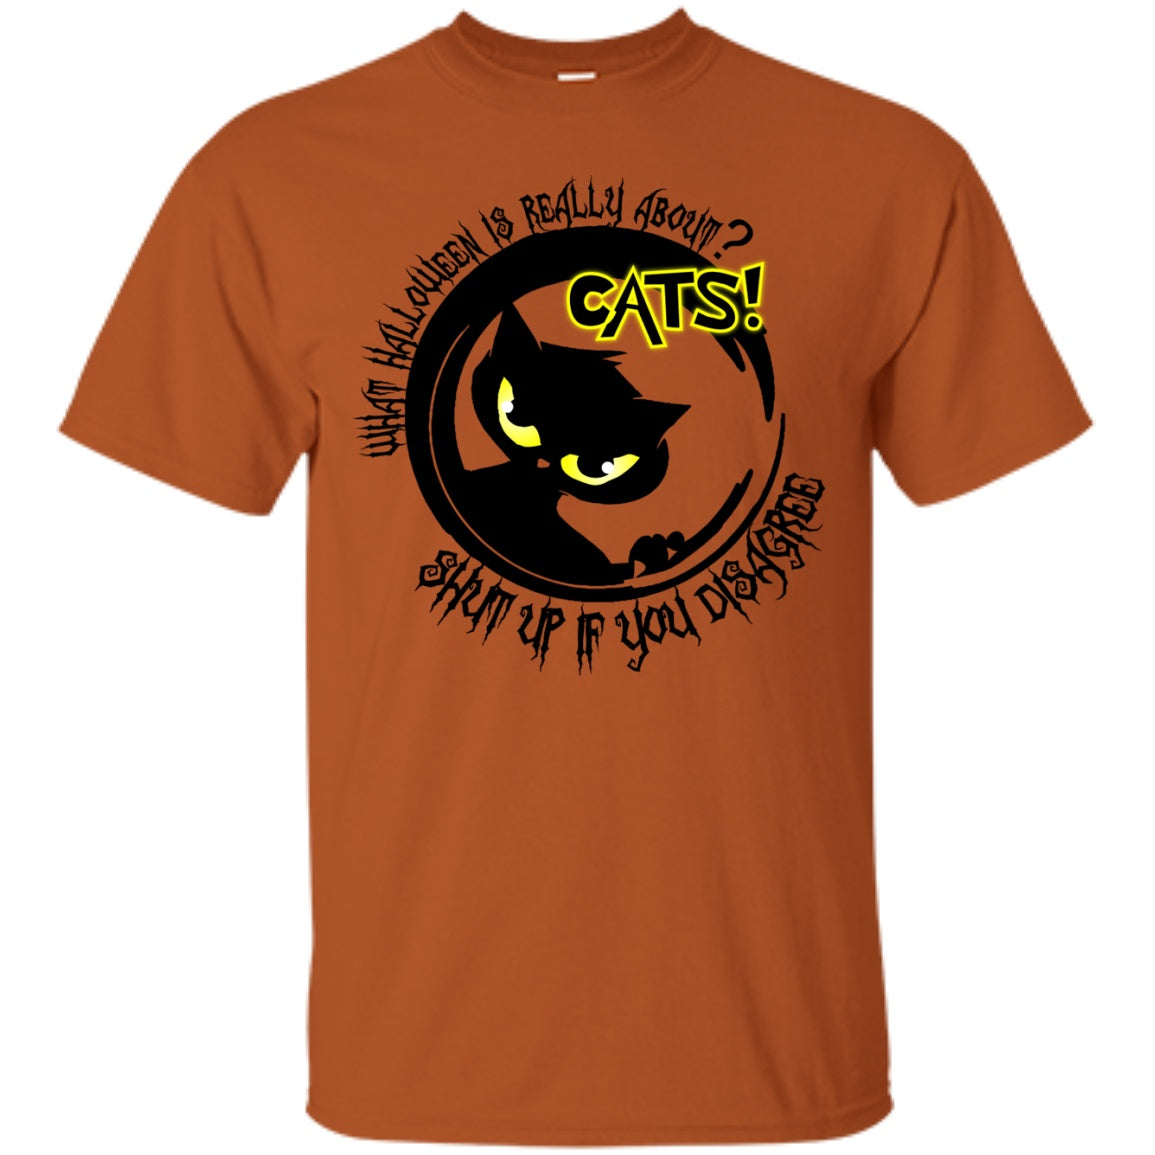 Halloween Is Really About Cats - Tees & Hoodies - GoneBold.gift